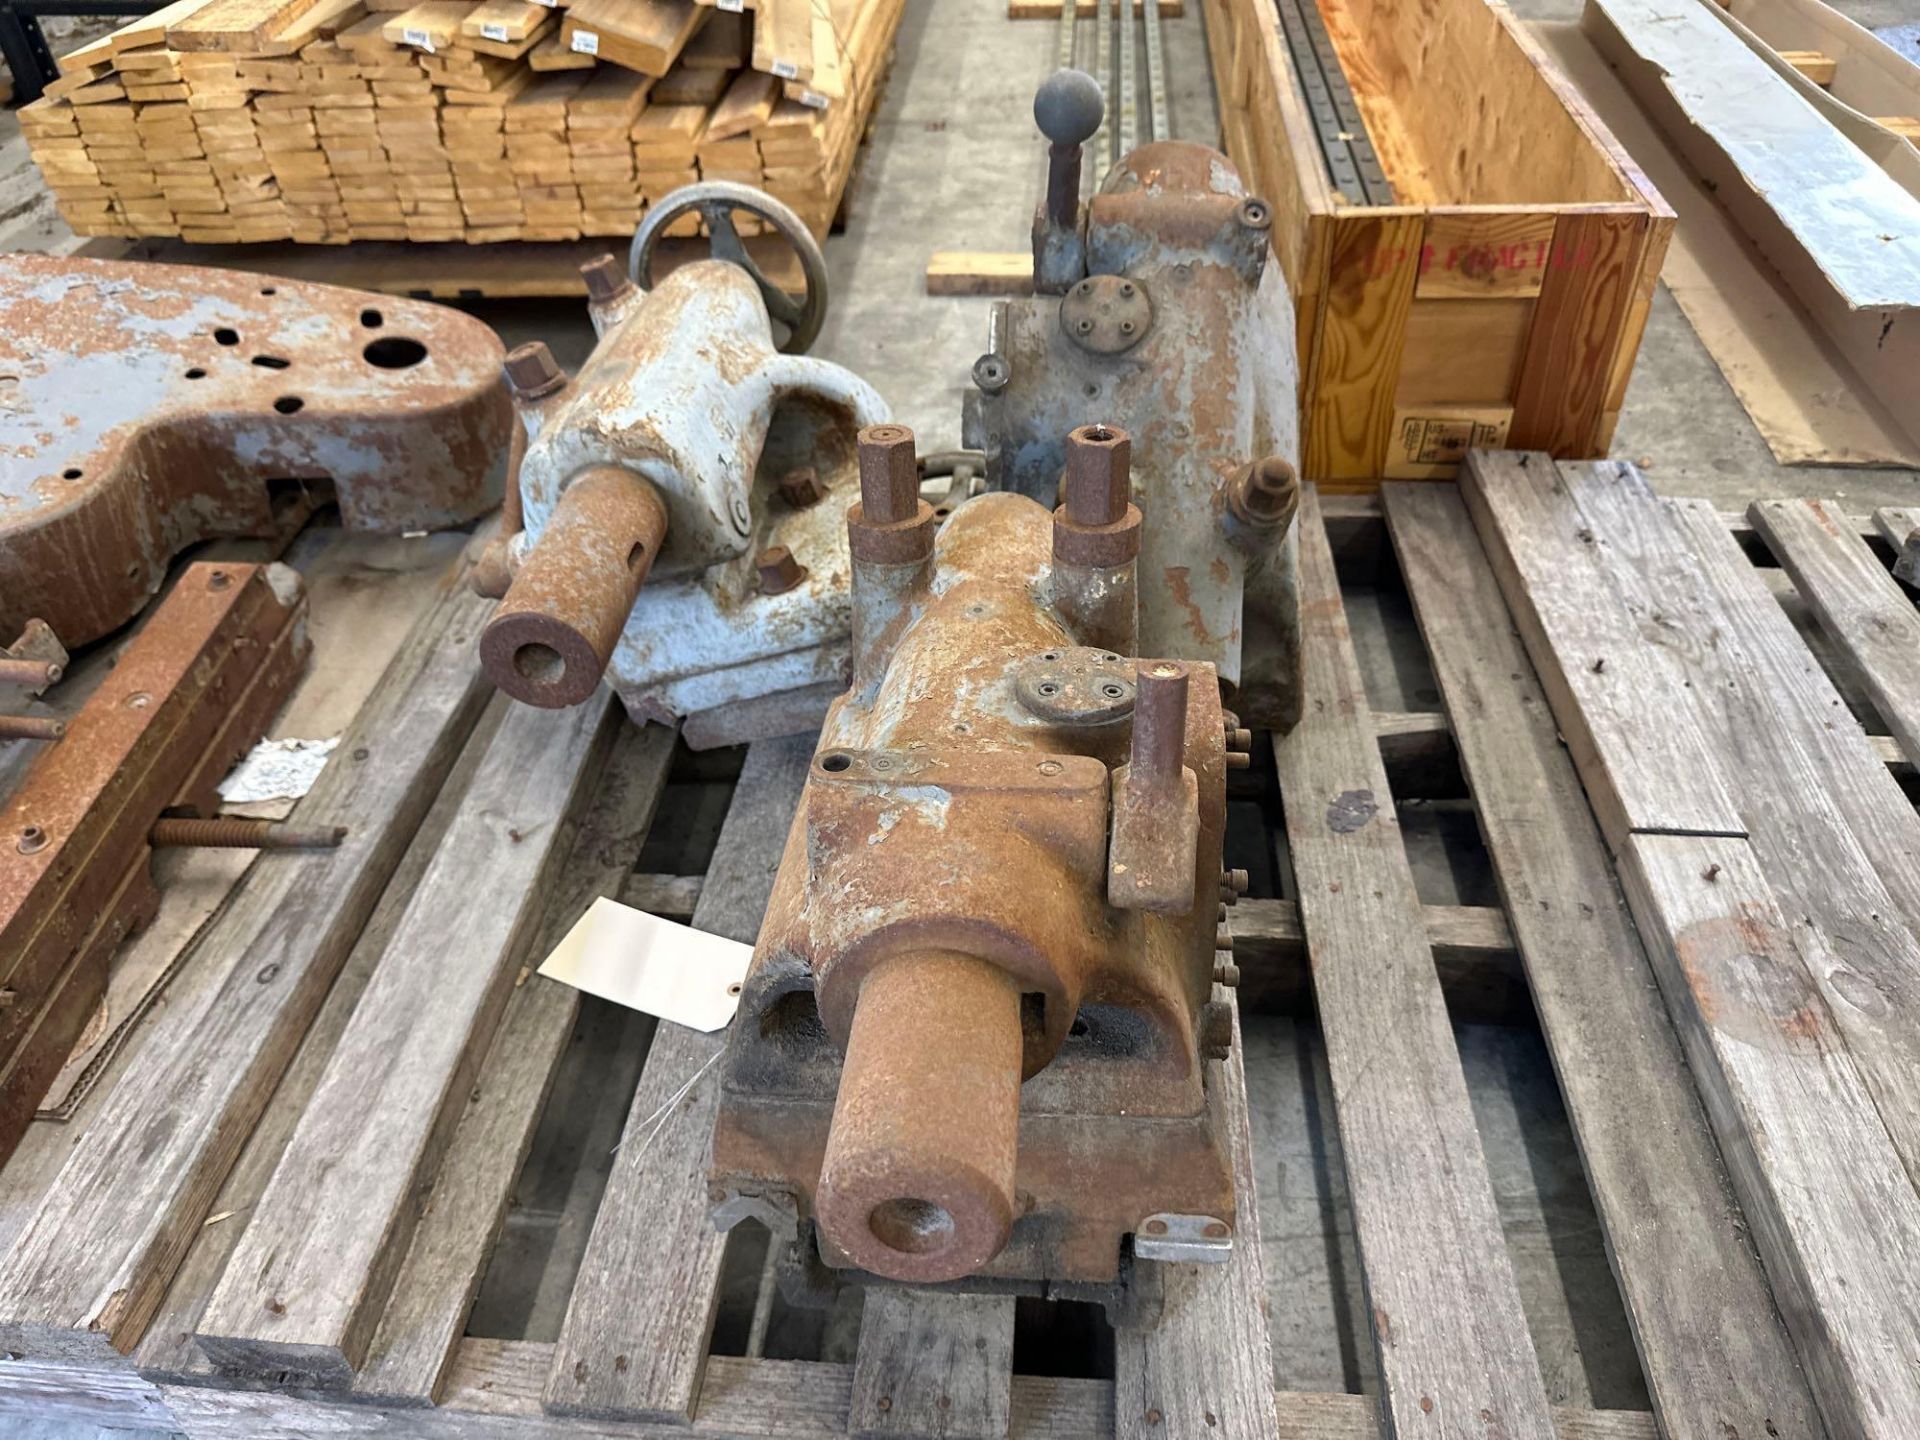 Lot of 14 Pallets of Axelson Parts: Motors, Gear Boxes, Steady Rests, Tail Stocks, Electrical Cabine - Image 29 of 31